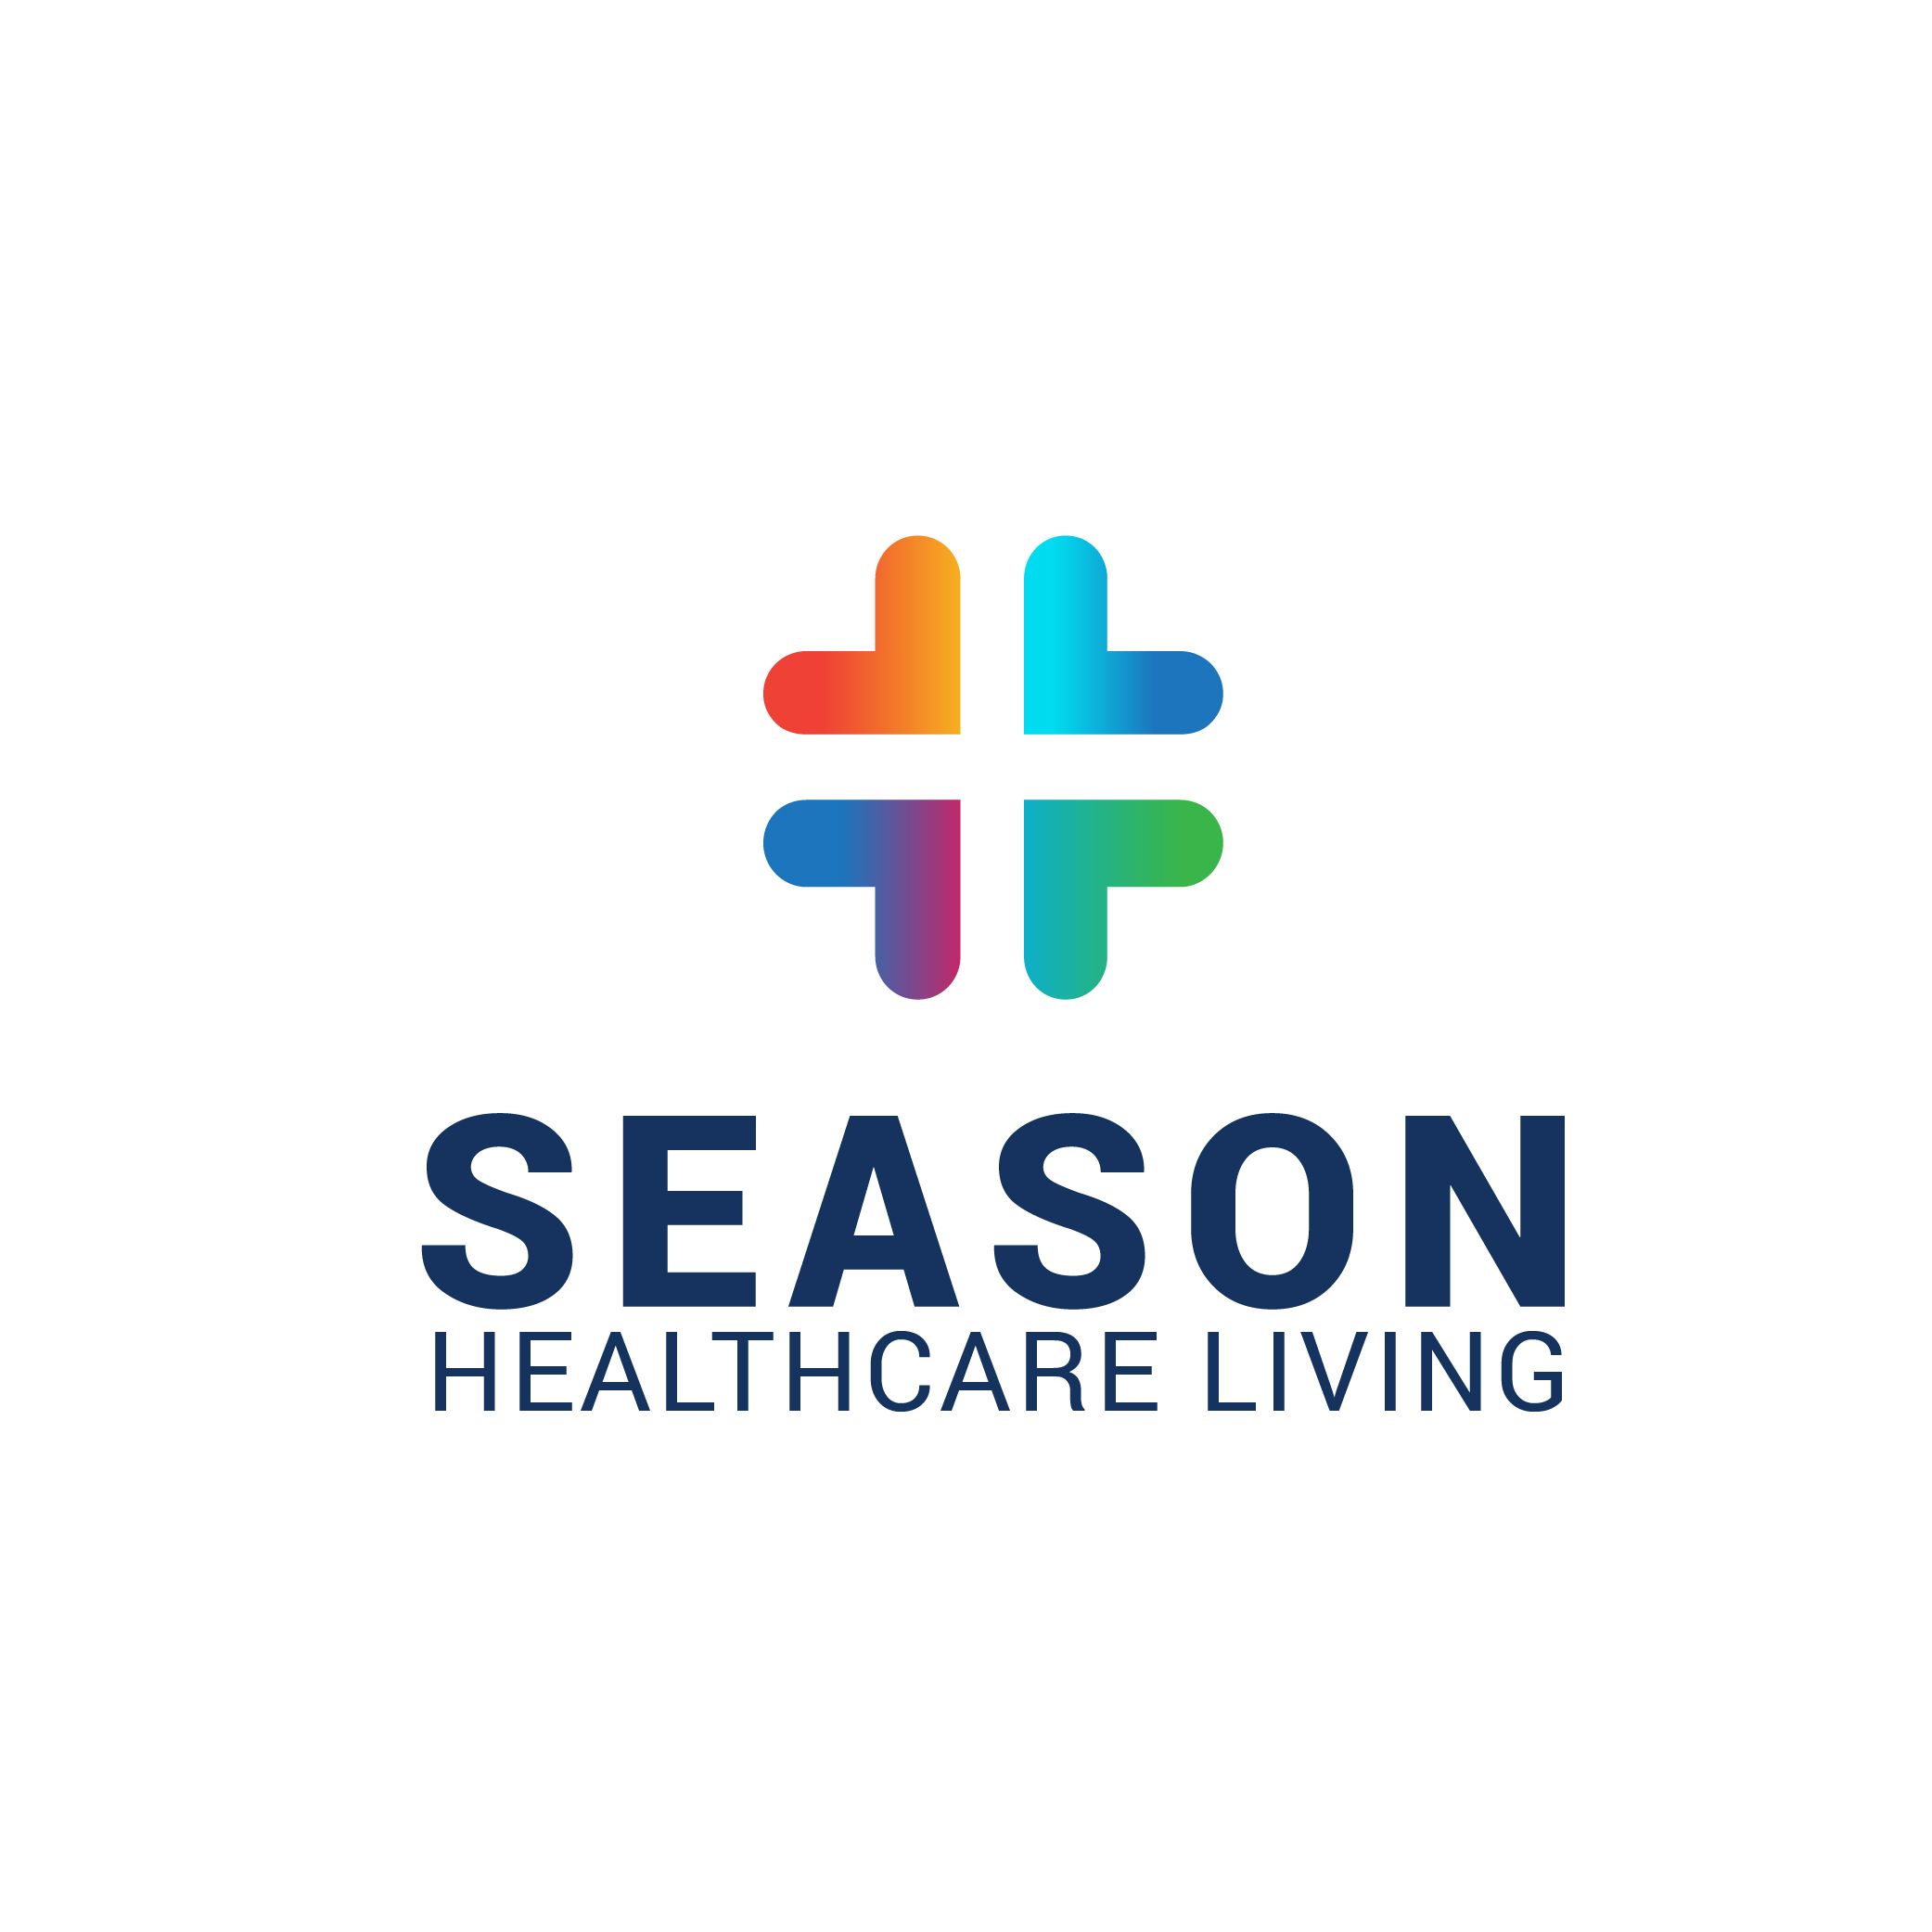 Season Healthcare Living with brightly coloured design